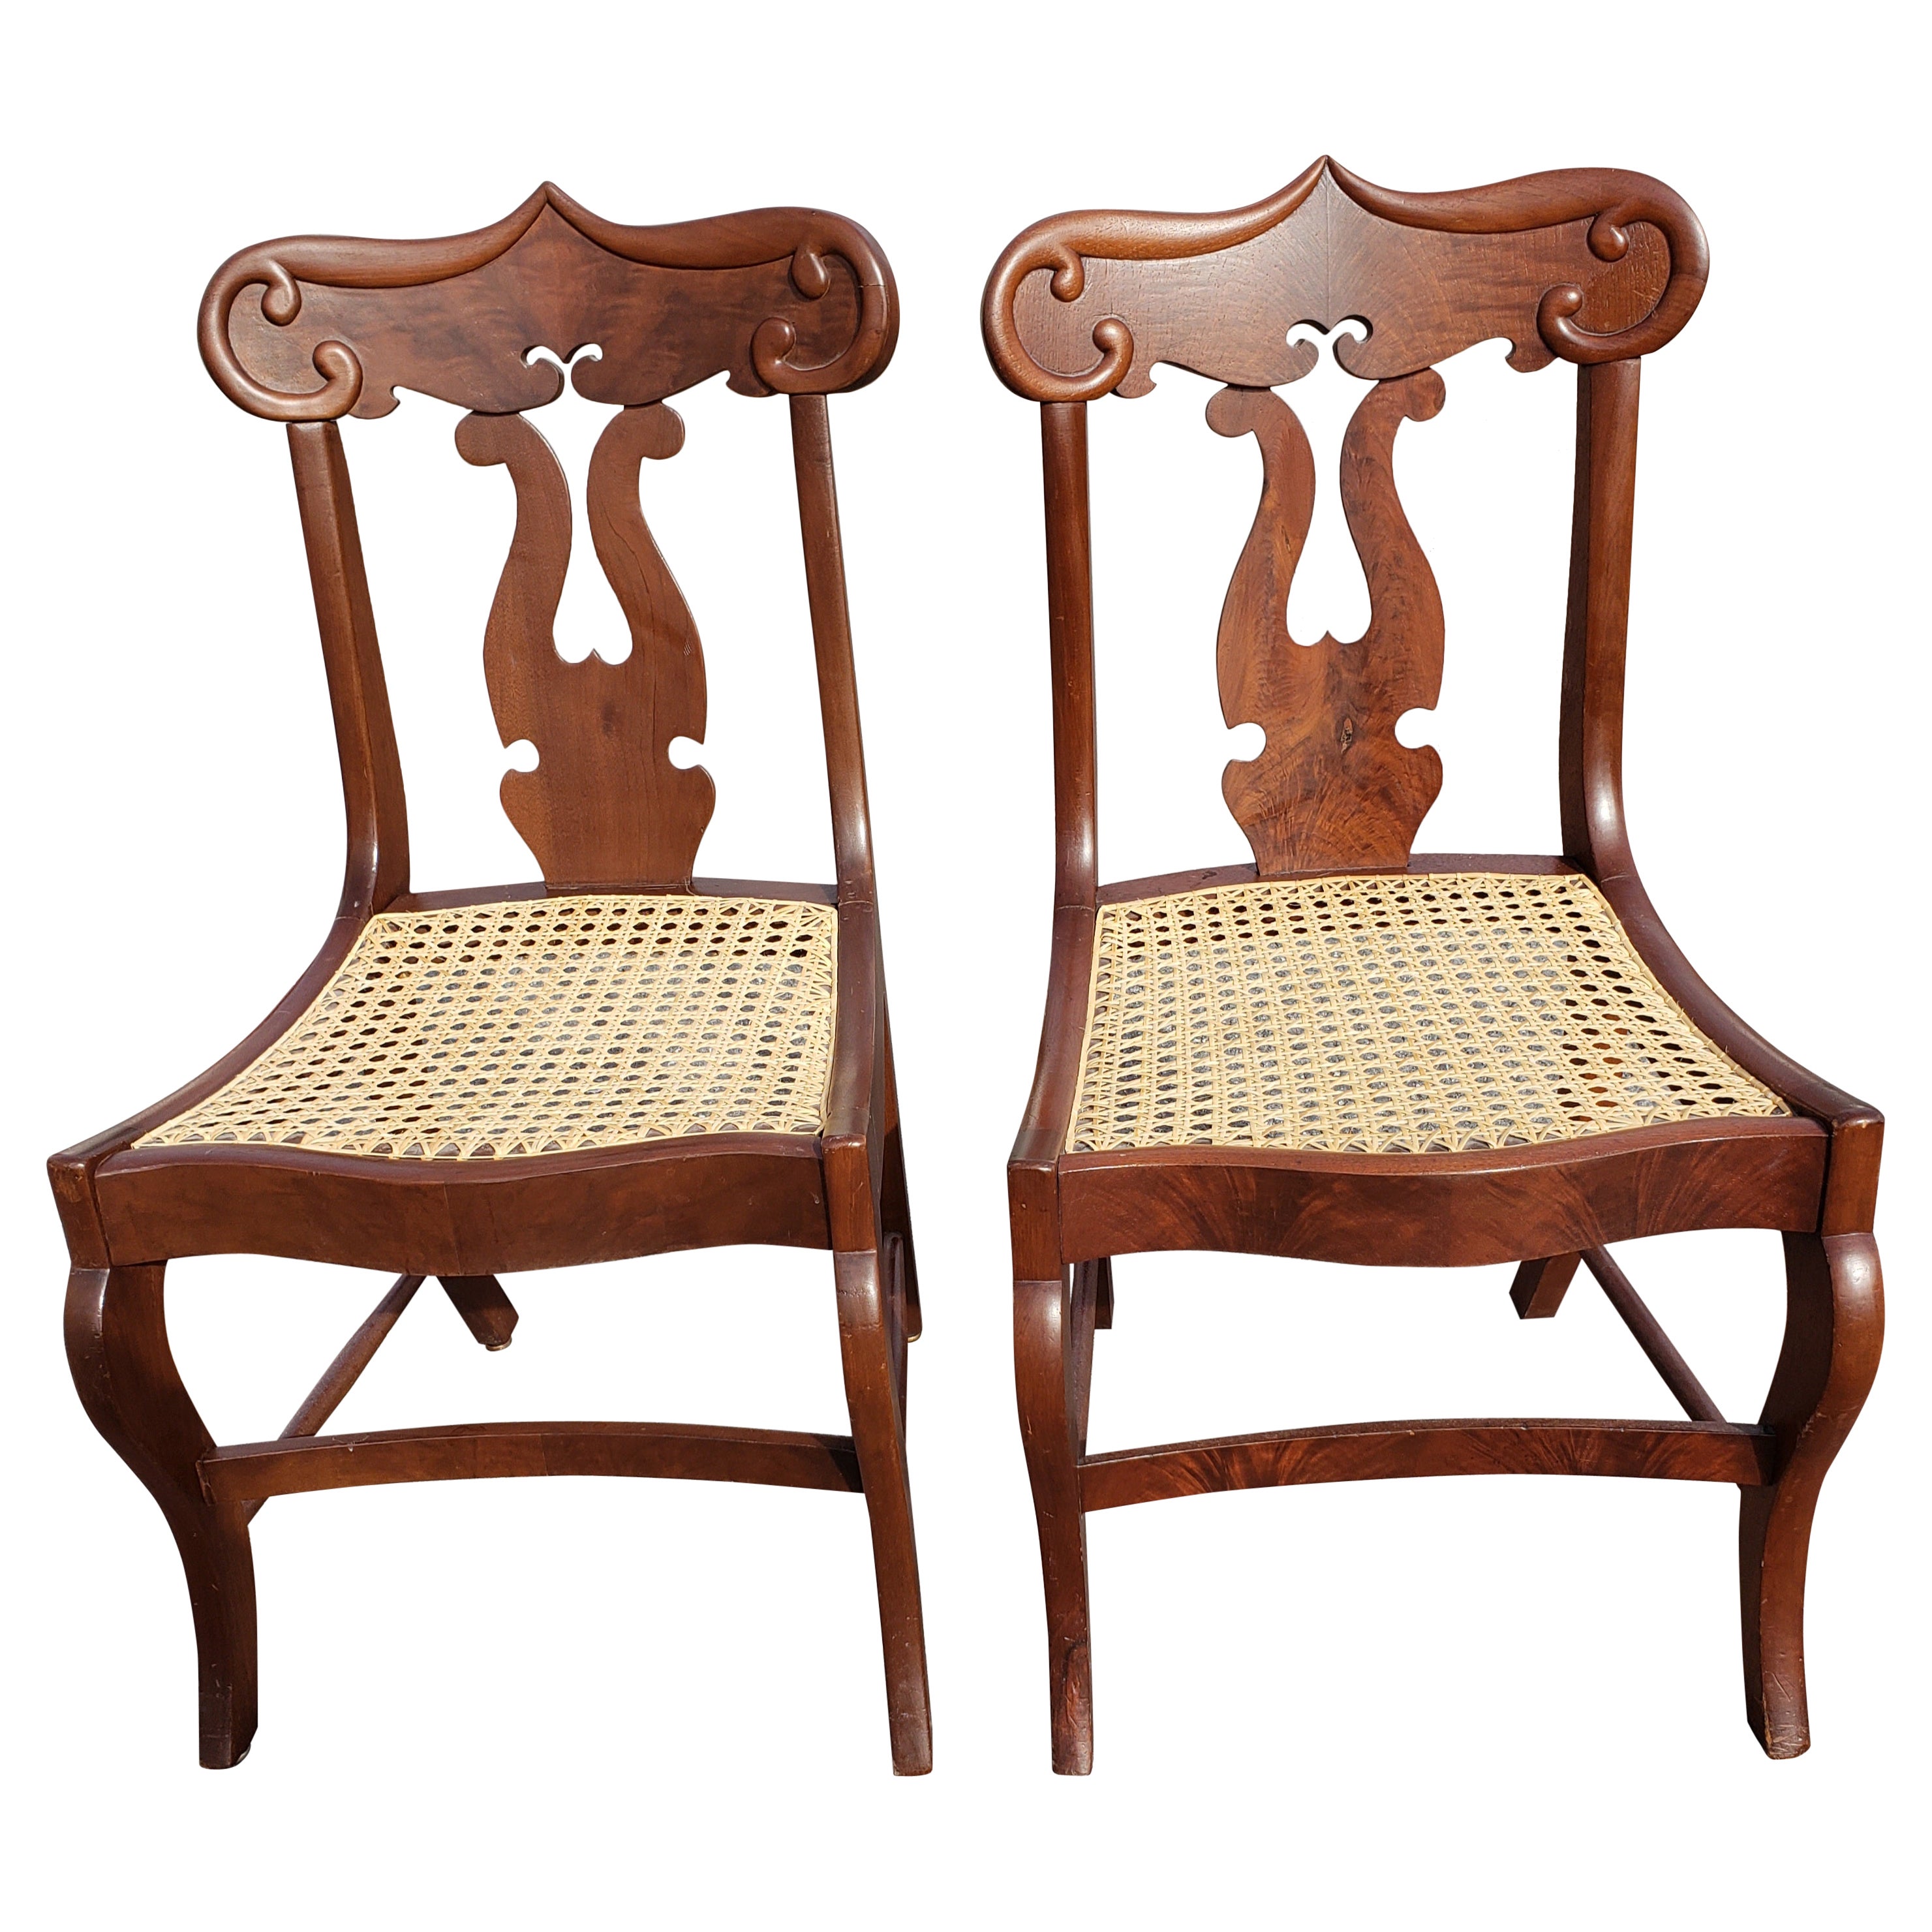 American Empire Flame Mahogany Cane Seat Chairs, circa 1890s a Pair For Sale